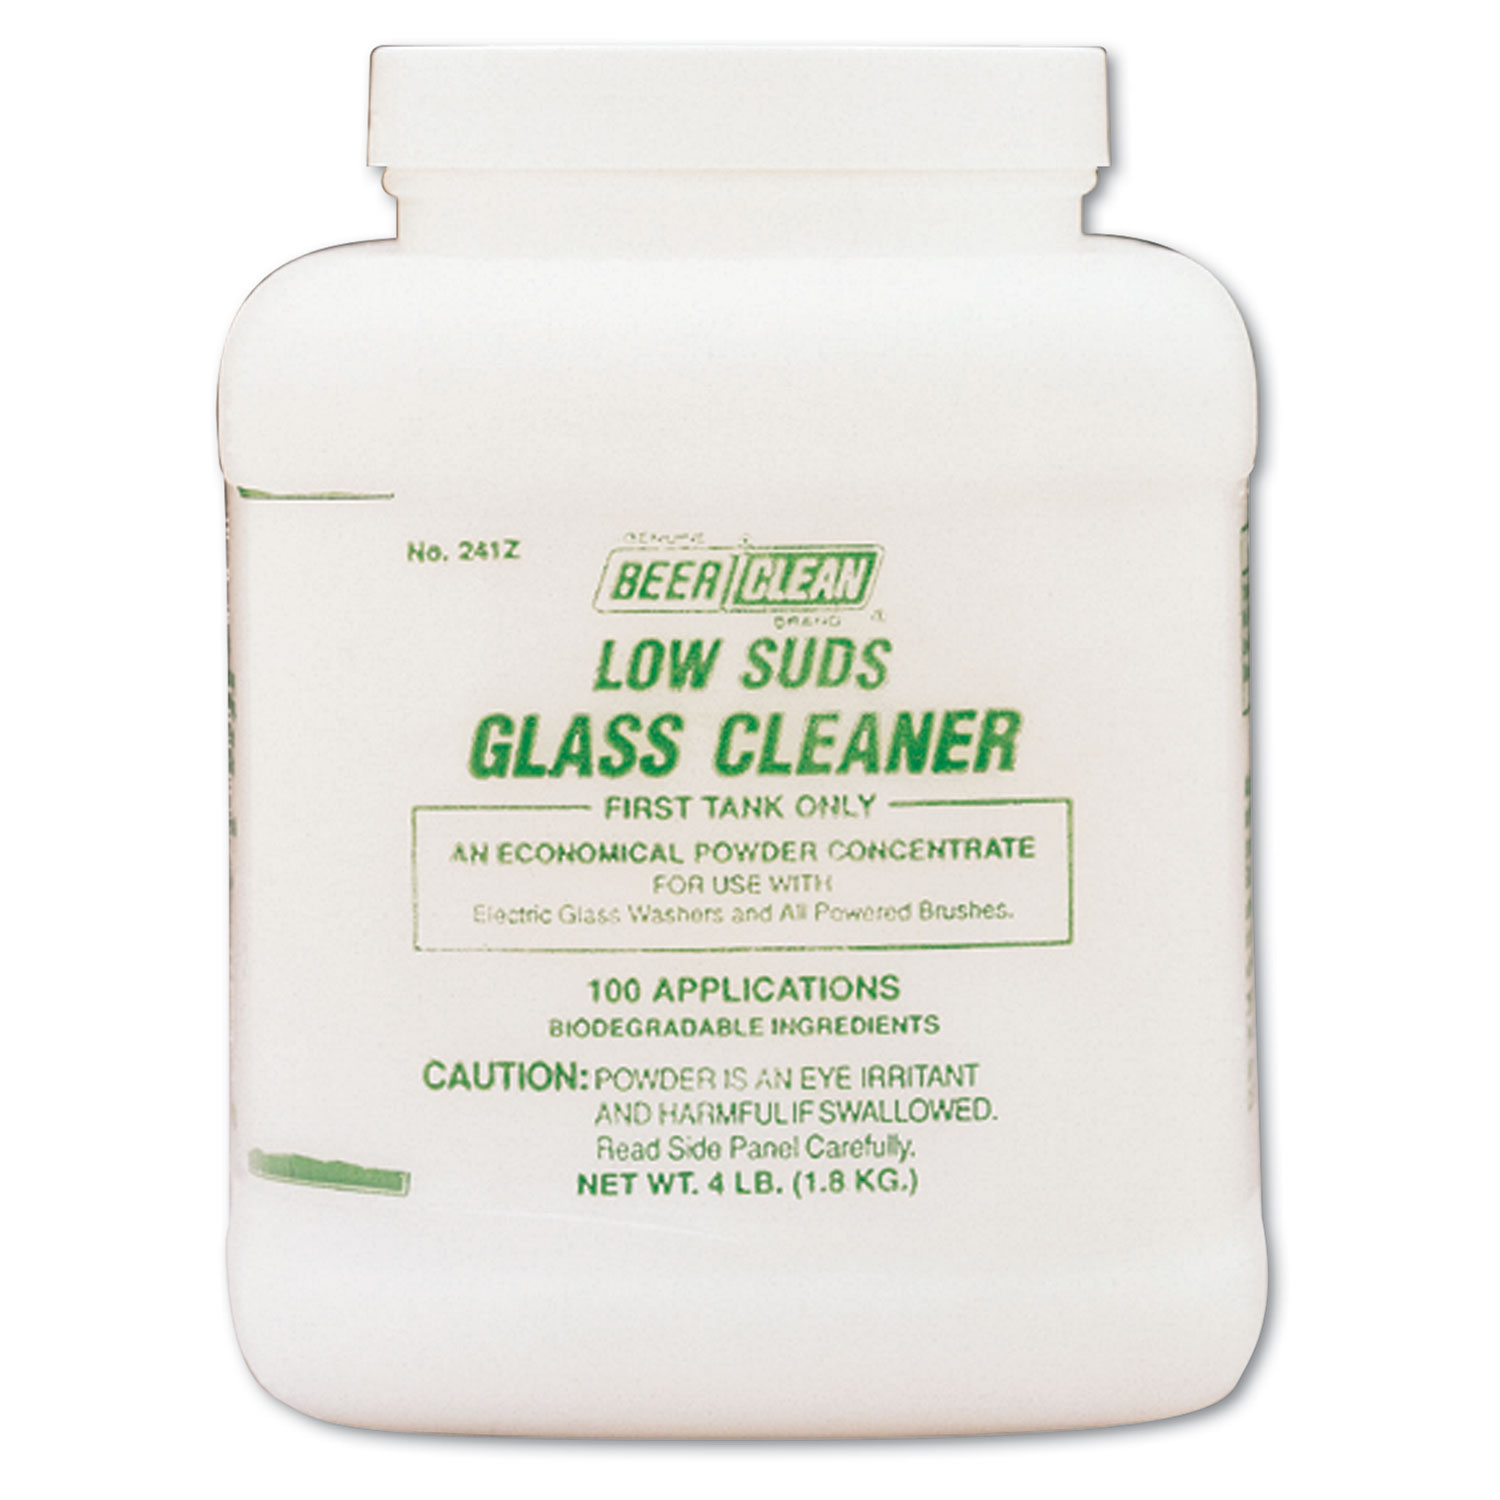  Diversey 990241 Beer Clean Glass Cleaner, Unscented, Powder, 4 lb. Container (DVO990241) 